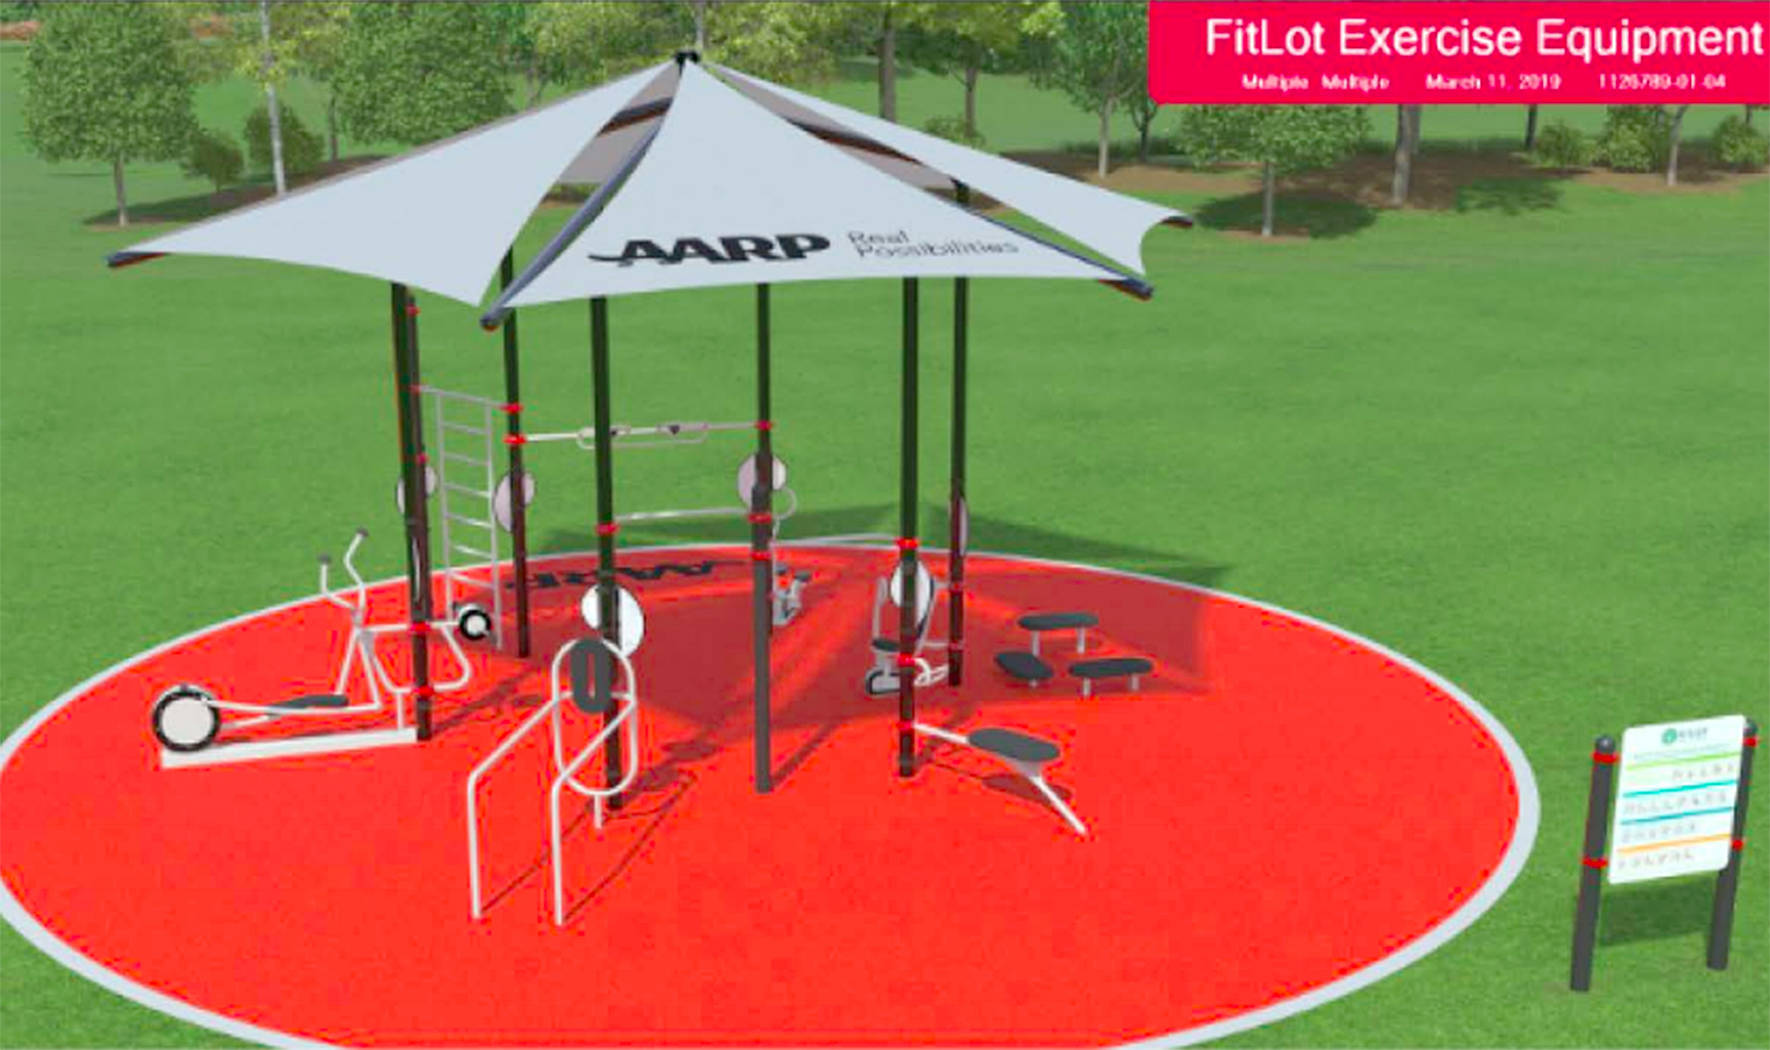 A design of the future Renton Fitlot park, funded by AARP. Photo courtesy of AARP.